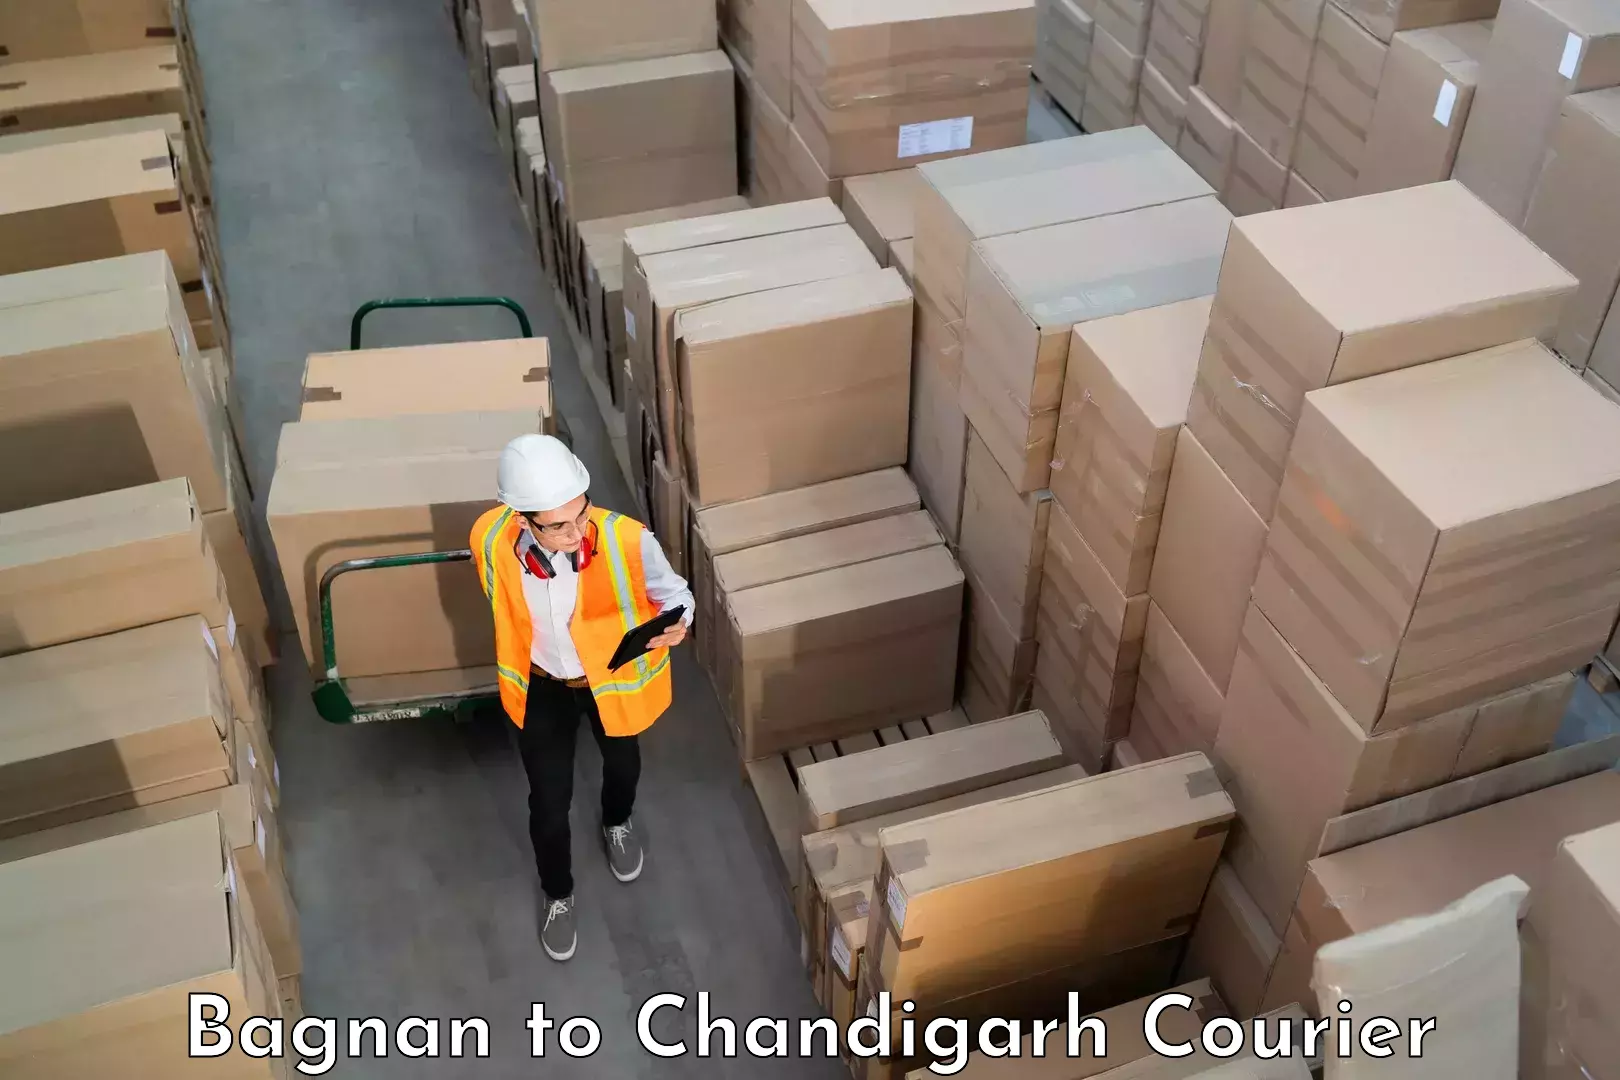 Baggage shipping experts Bagnan to Chandigarh